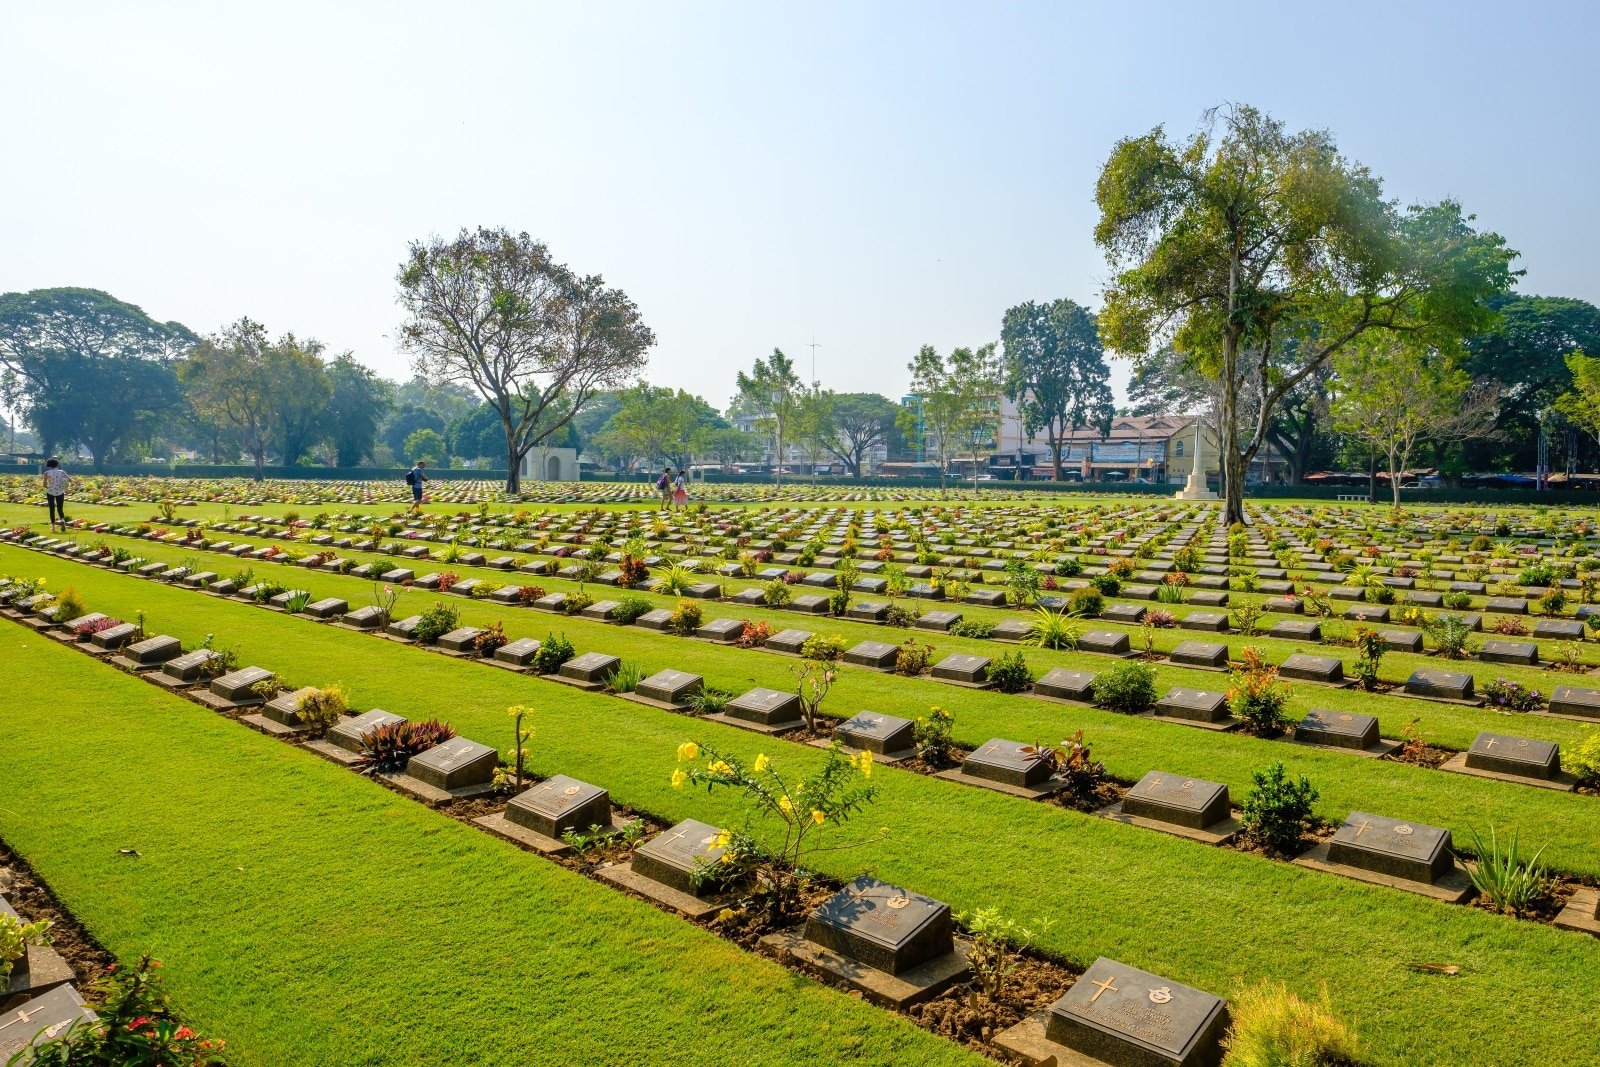 <p><span>In Kanchanaburi War Cemetery, you’ll find a place of profound peace and respect. This meticulously maintained cemetery is the final resting place for over 6,000 Allied prisoners of war who lost their lives during the construction of the Death Railway. Each headstone tells a story of bravery and hardship, offering a space for reflection and remembrance.</span></p> <p><span>The cemetery, with its rows of white gravestones set against a backdrop of manicured lawns and tropical plants, starkly contrasts the turbulent history it represents. Pay your respects and understand the human cost of war and the enduring spirit of those who endured unimaginable hardships.</span></p> <p><b>Insider’s Tip: </b><span>Visit during the early morning or late afternoon for a quieter experience. </span></p> <p><b>When To Travel: </b><span>Open year-round, but the cooler months are more comfortable.</span></p> <p><b>How To Get There: </b><span>Located in Kanchanaburi town, it’s easily accessible on foot or by local transport.</span></p>